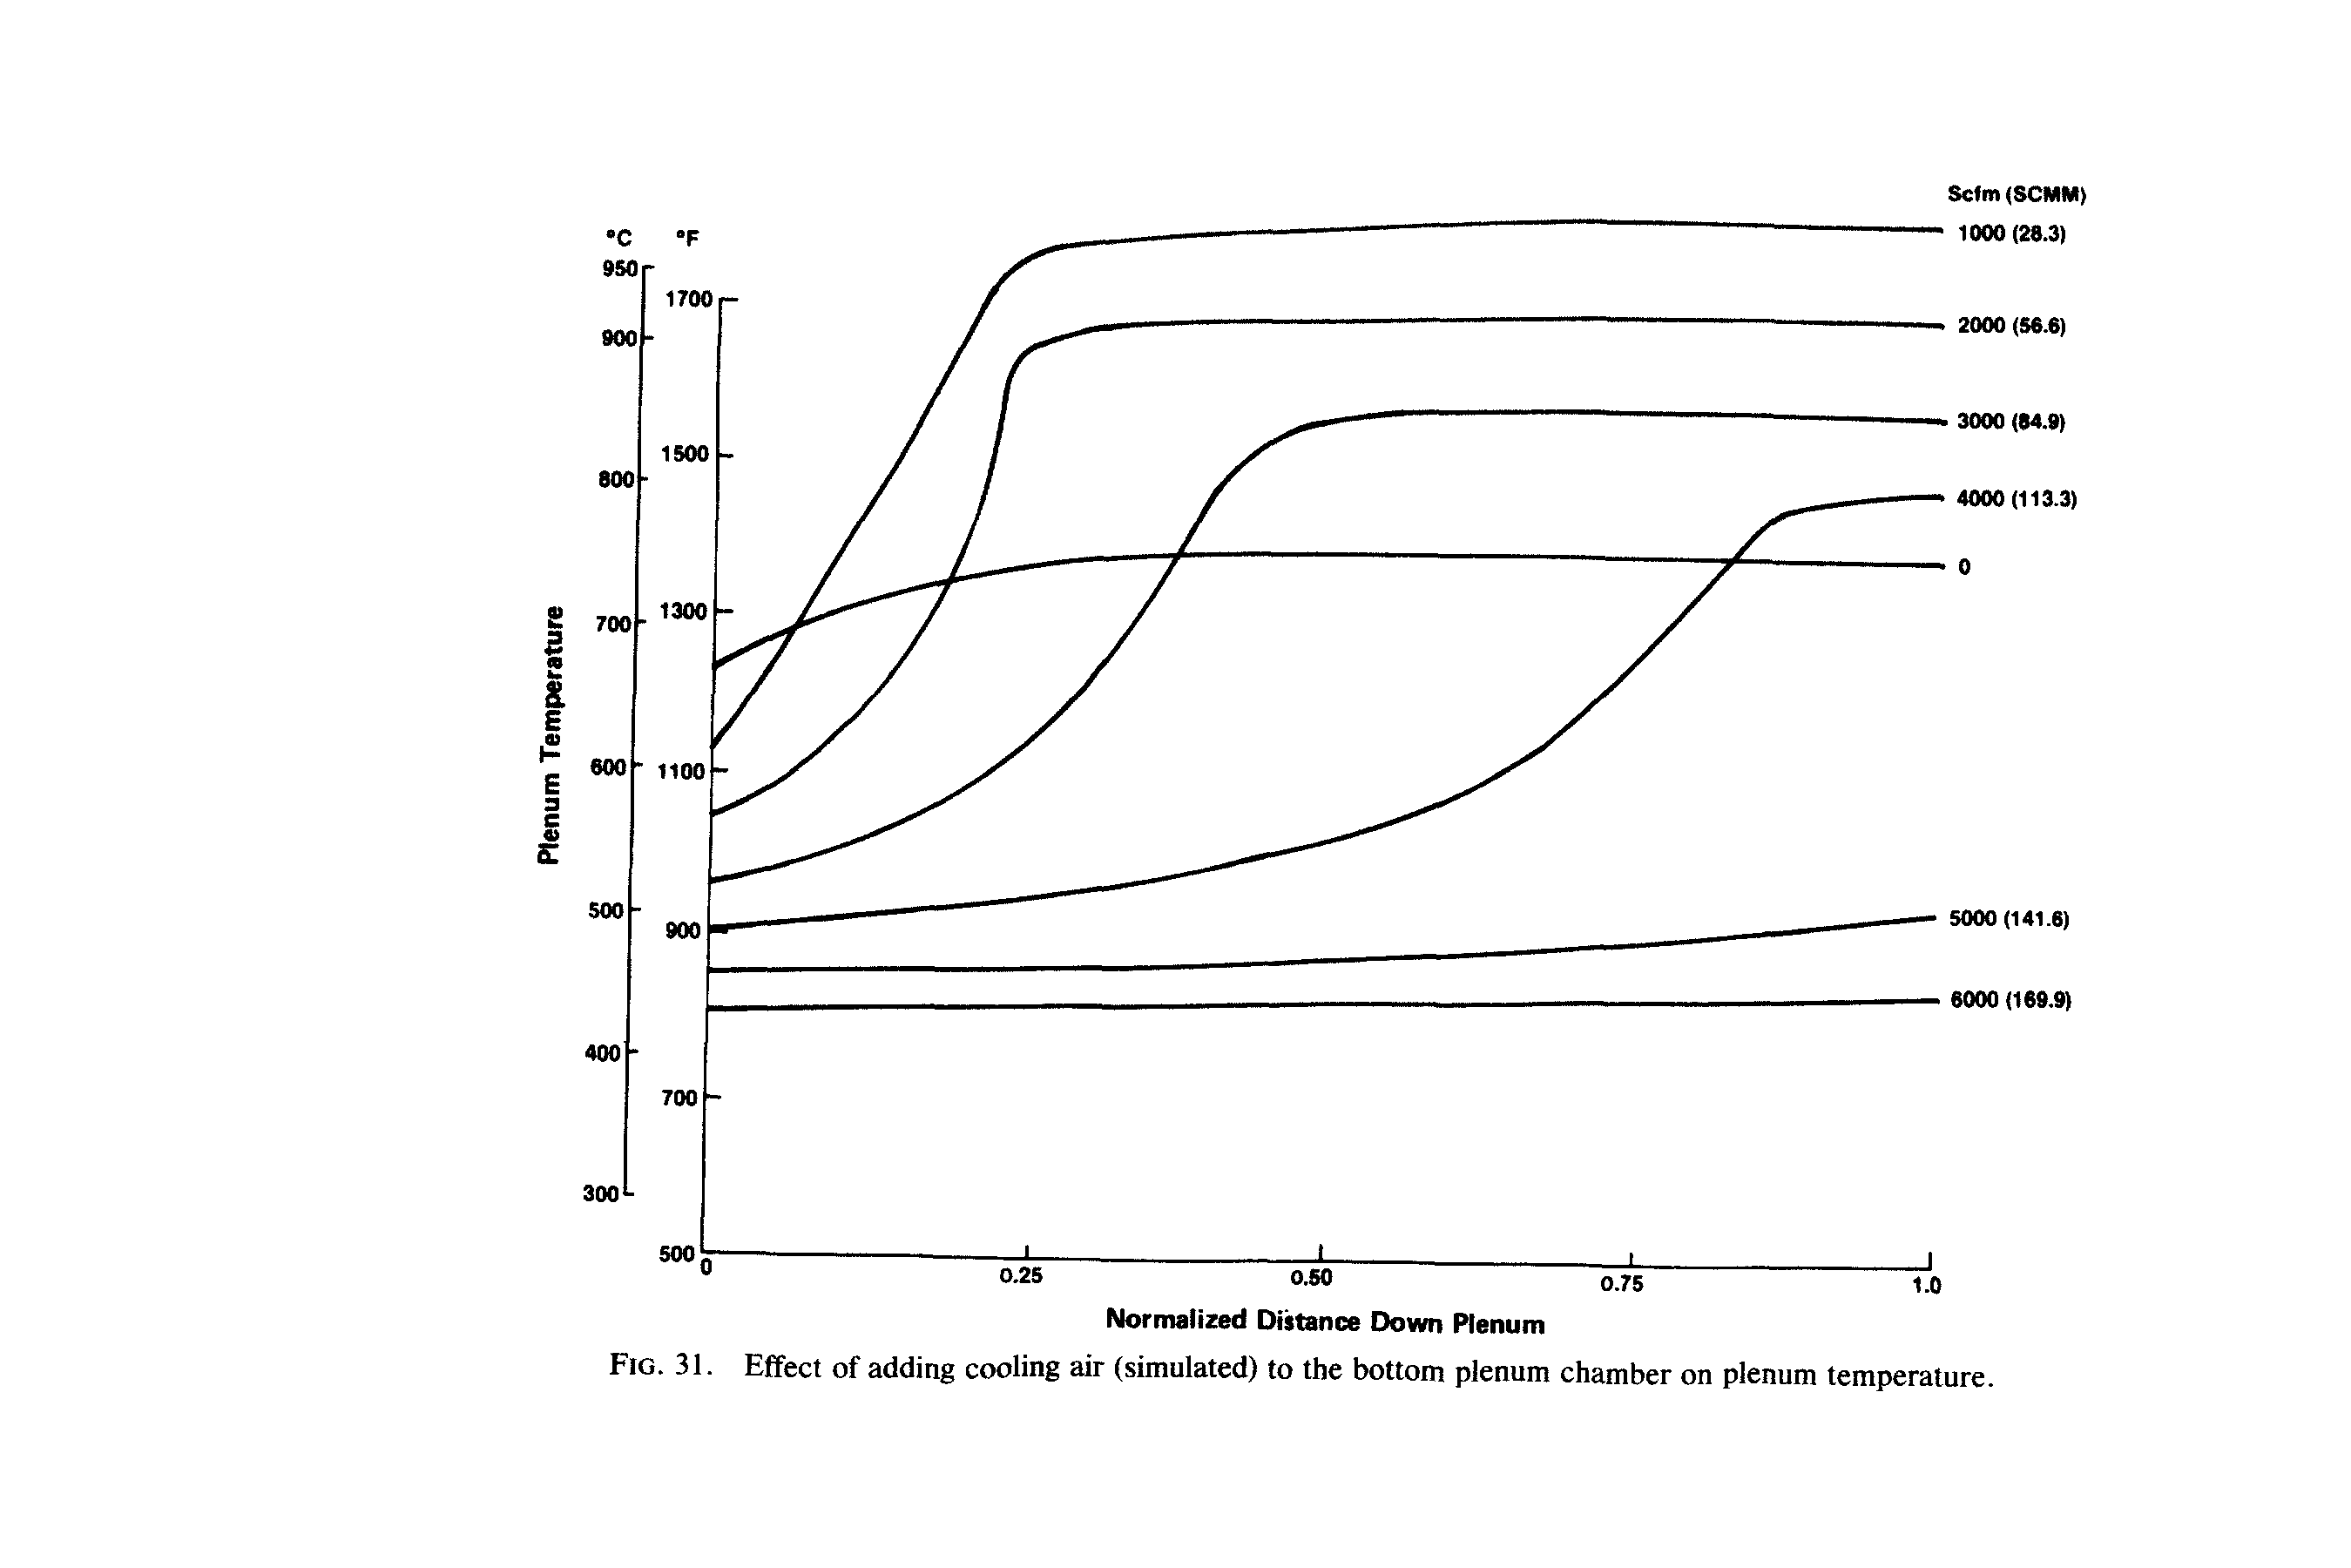 Fig. 31. Effect of adding cooling air (simulated) to the bottom plenum chamber on plenum temperature.